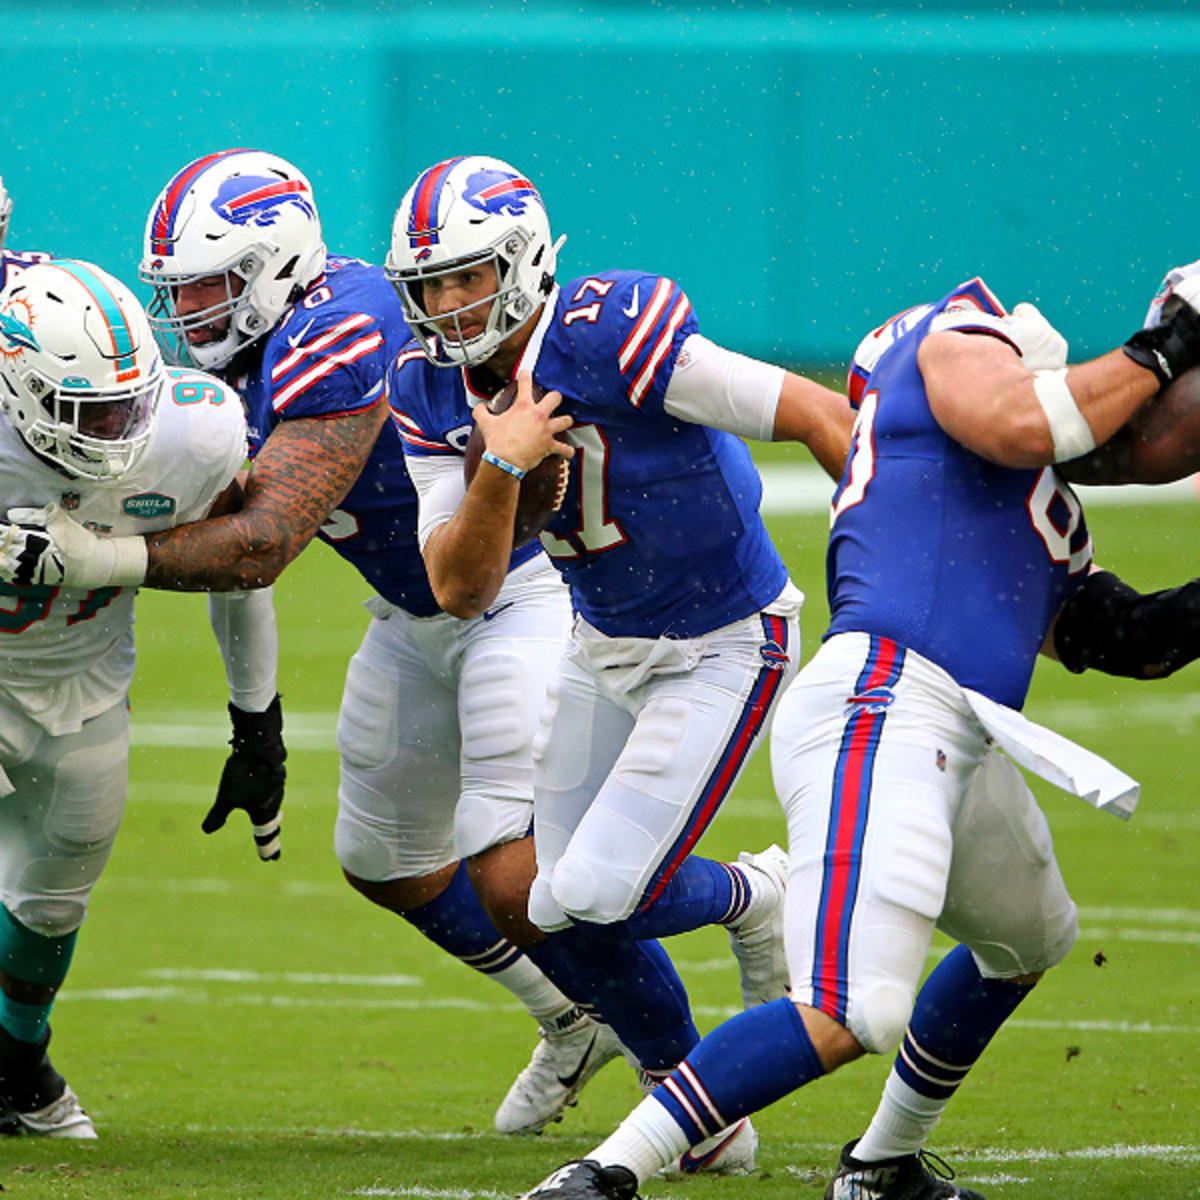 Miami Dolphins at Bills: Preview, Predictions, odds, TV